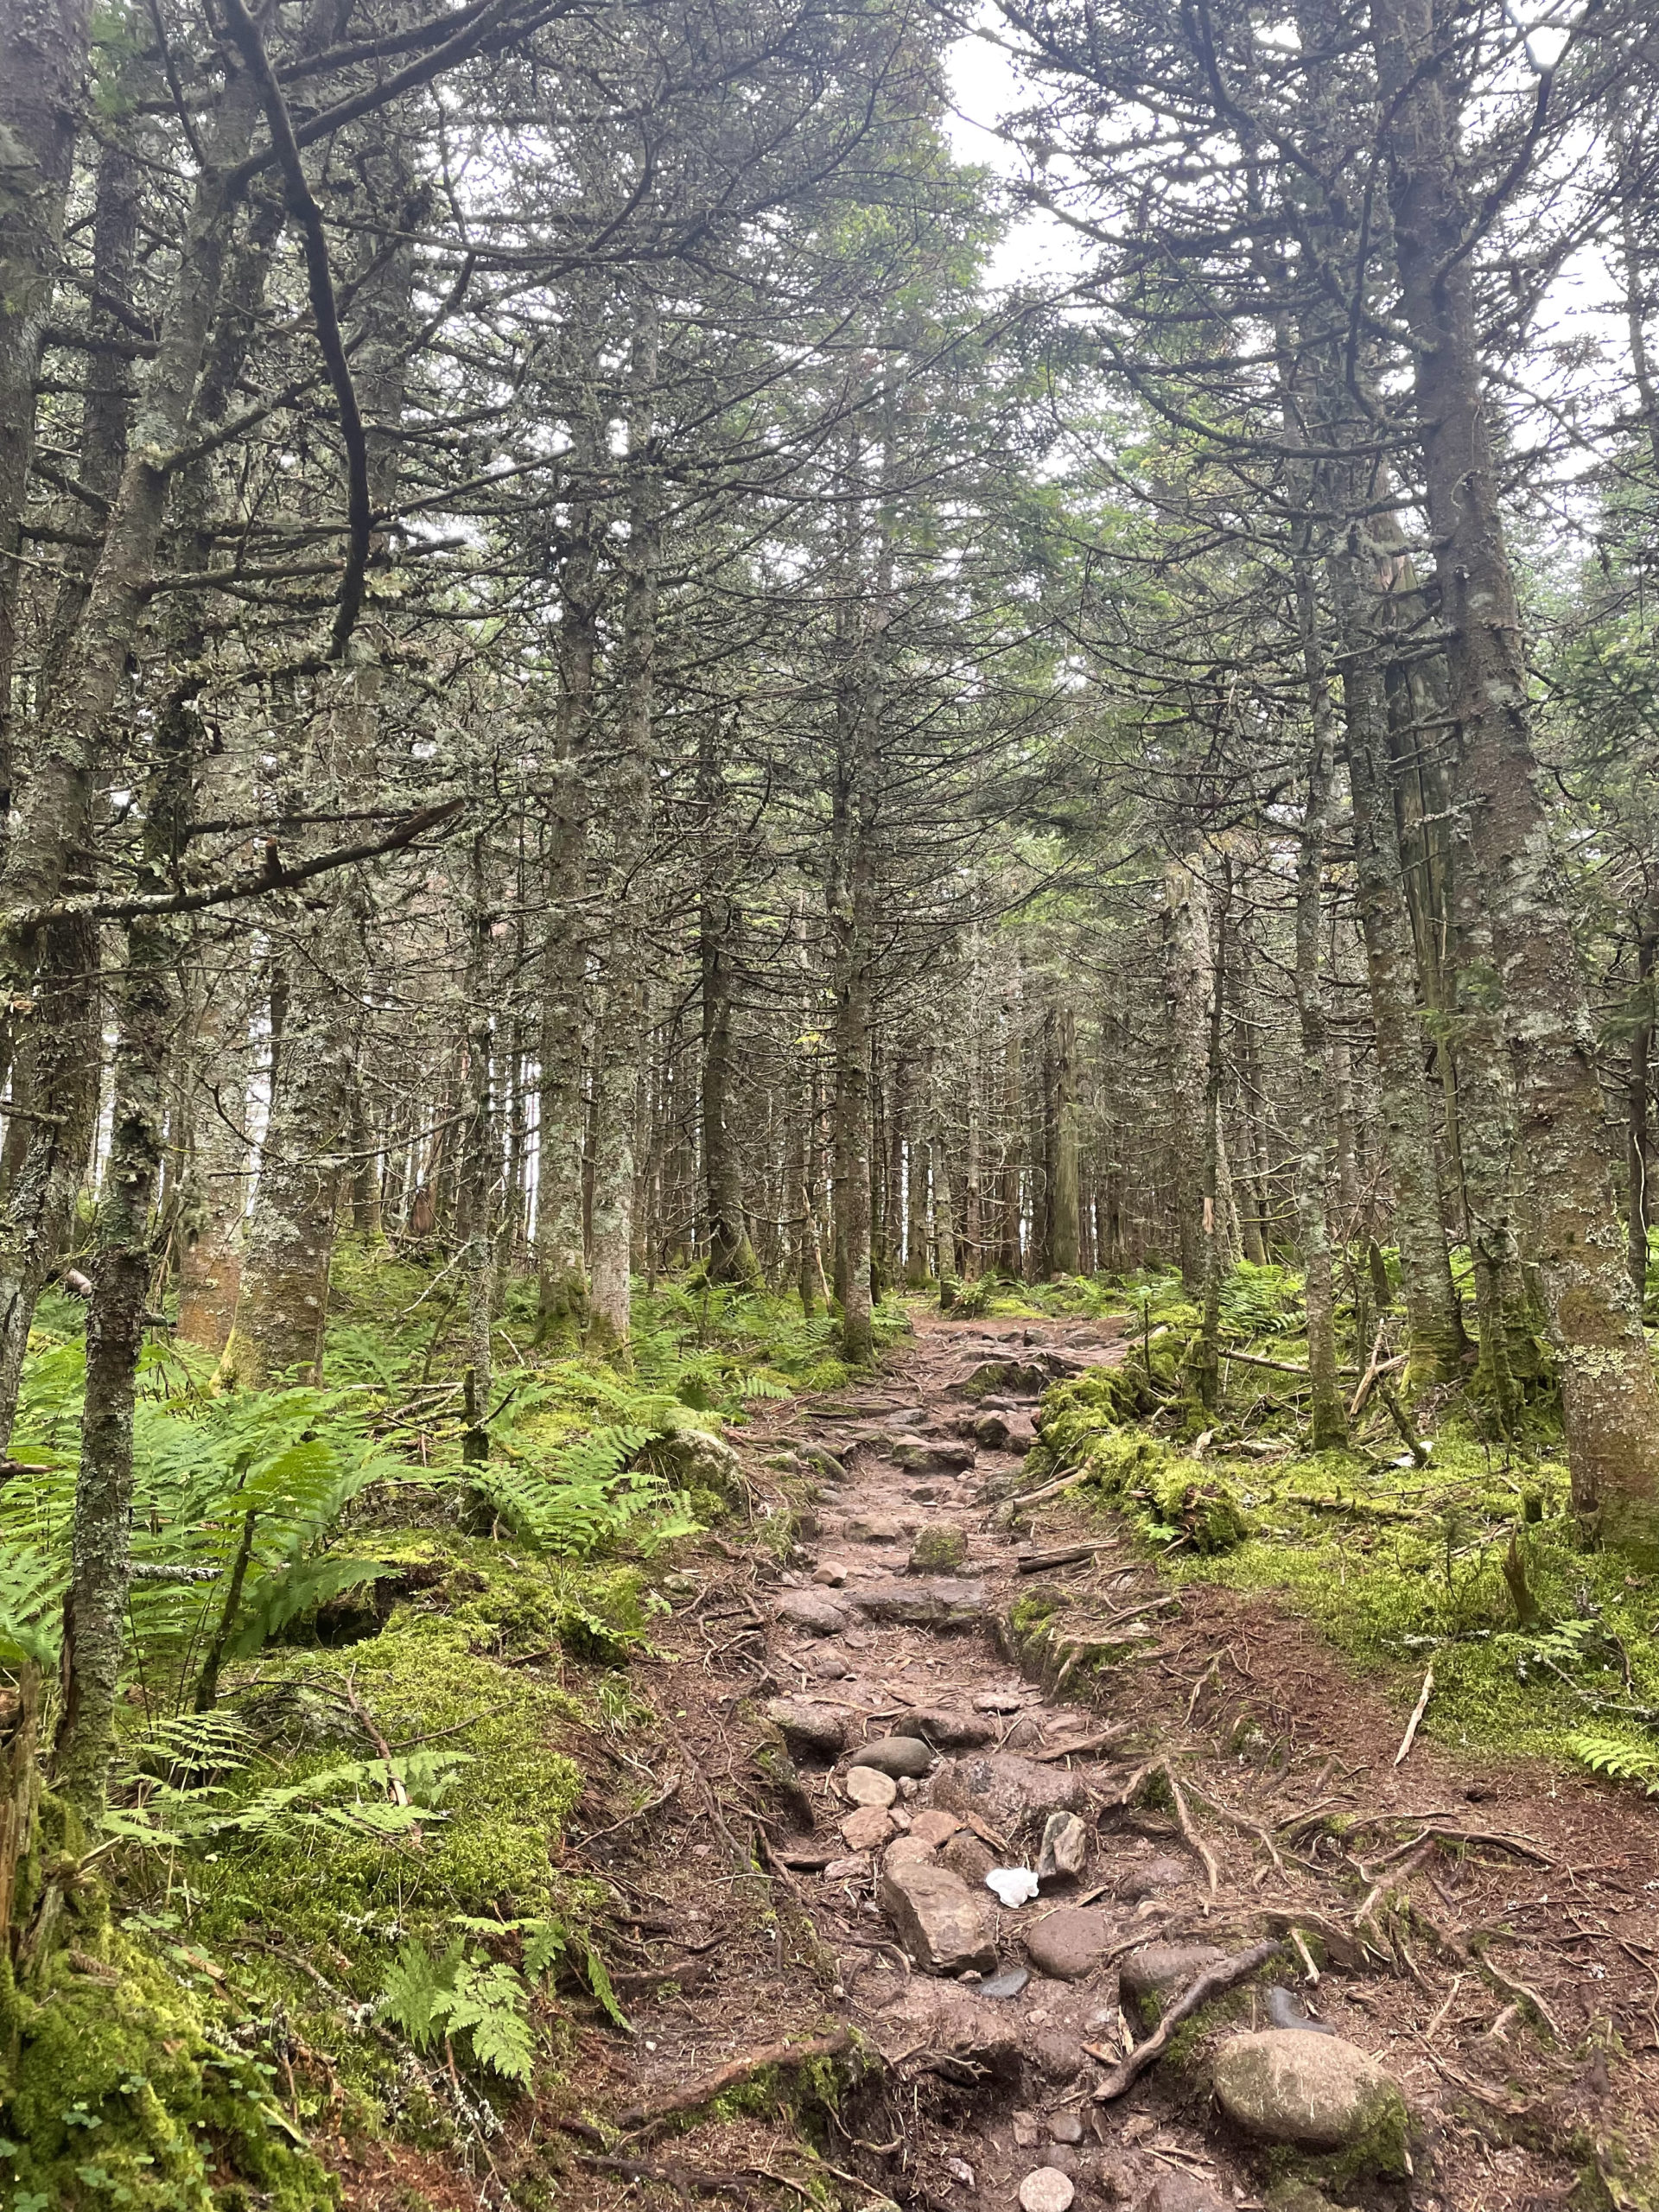 Mount Garfield Trail, seen while hiking Mt. Garfield in the White Mountain National Forest, NH